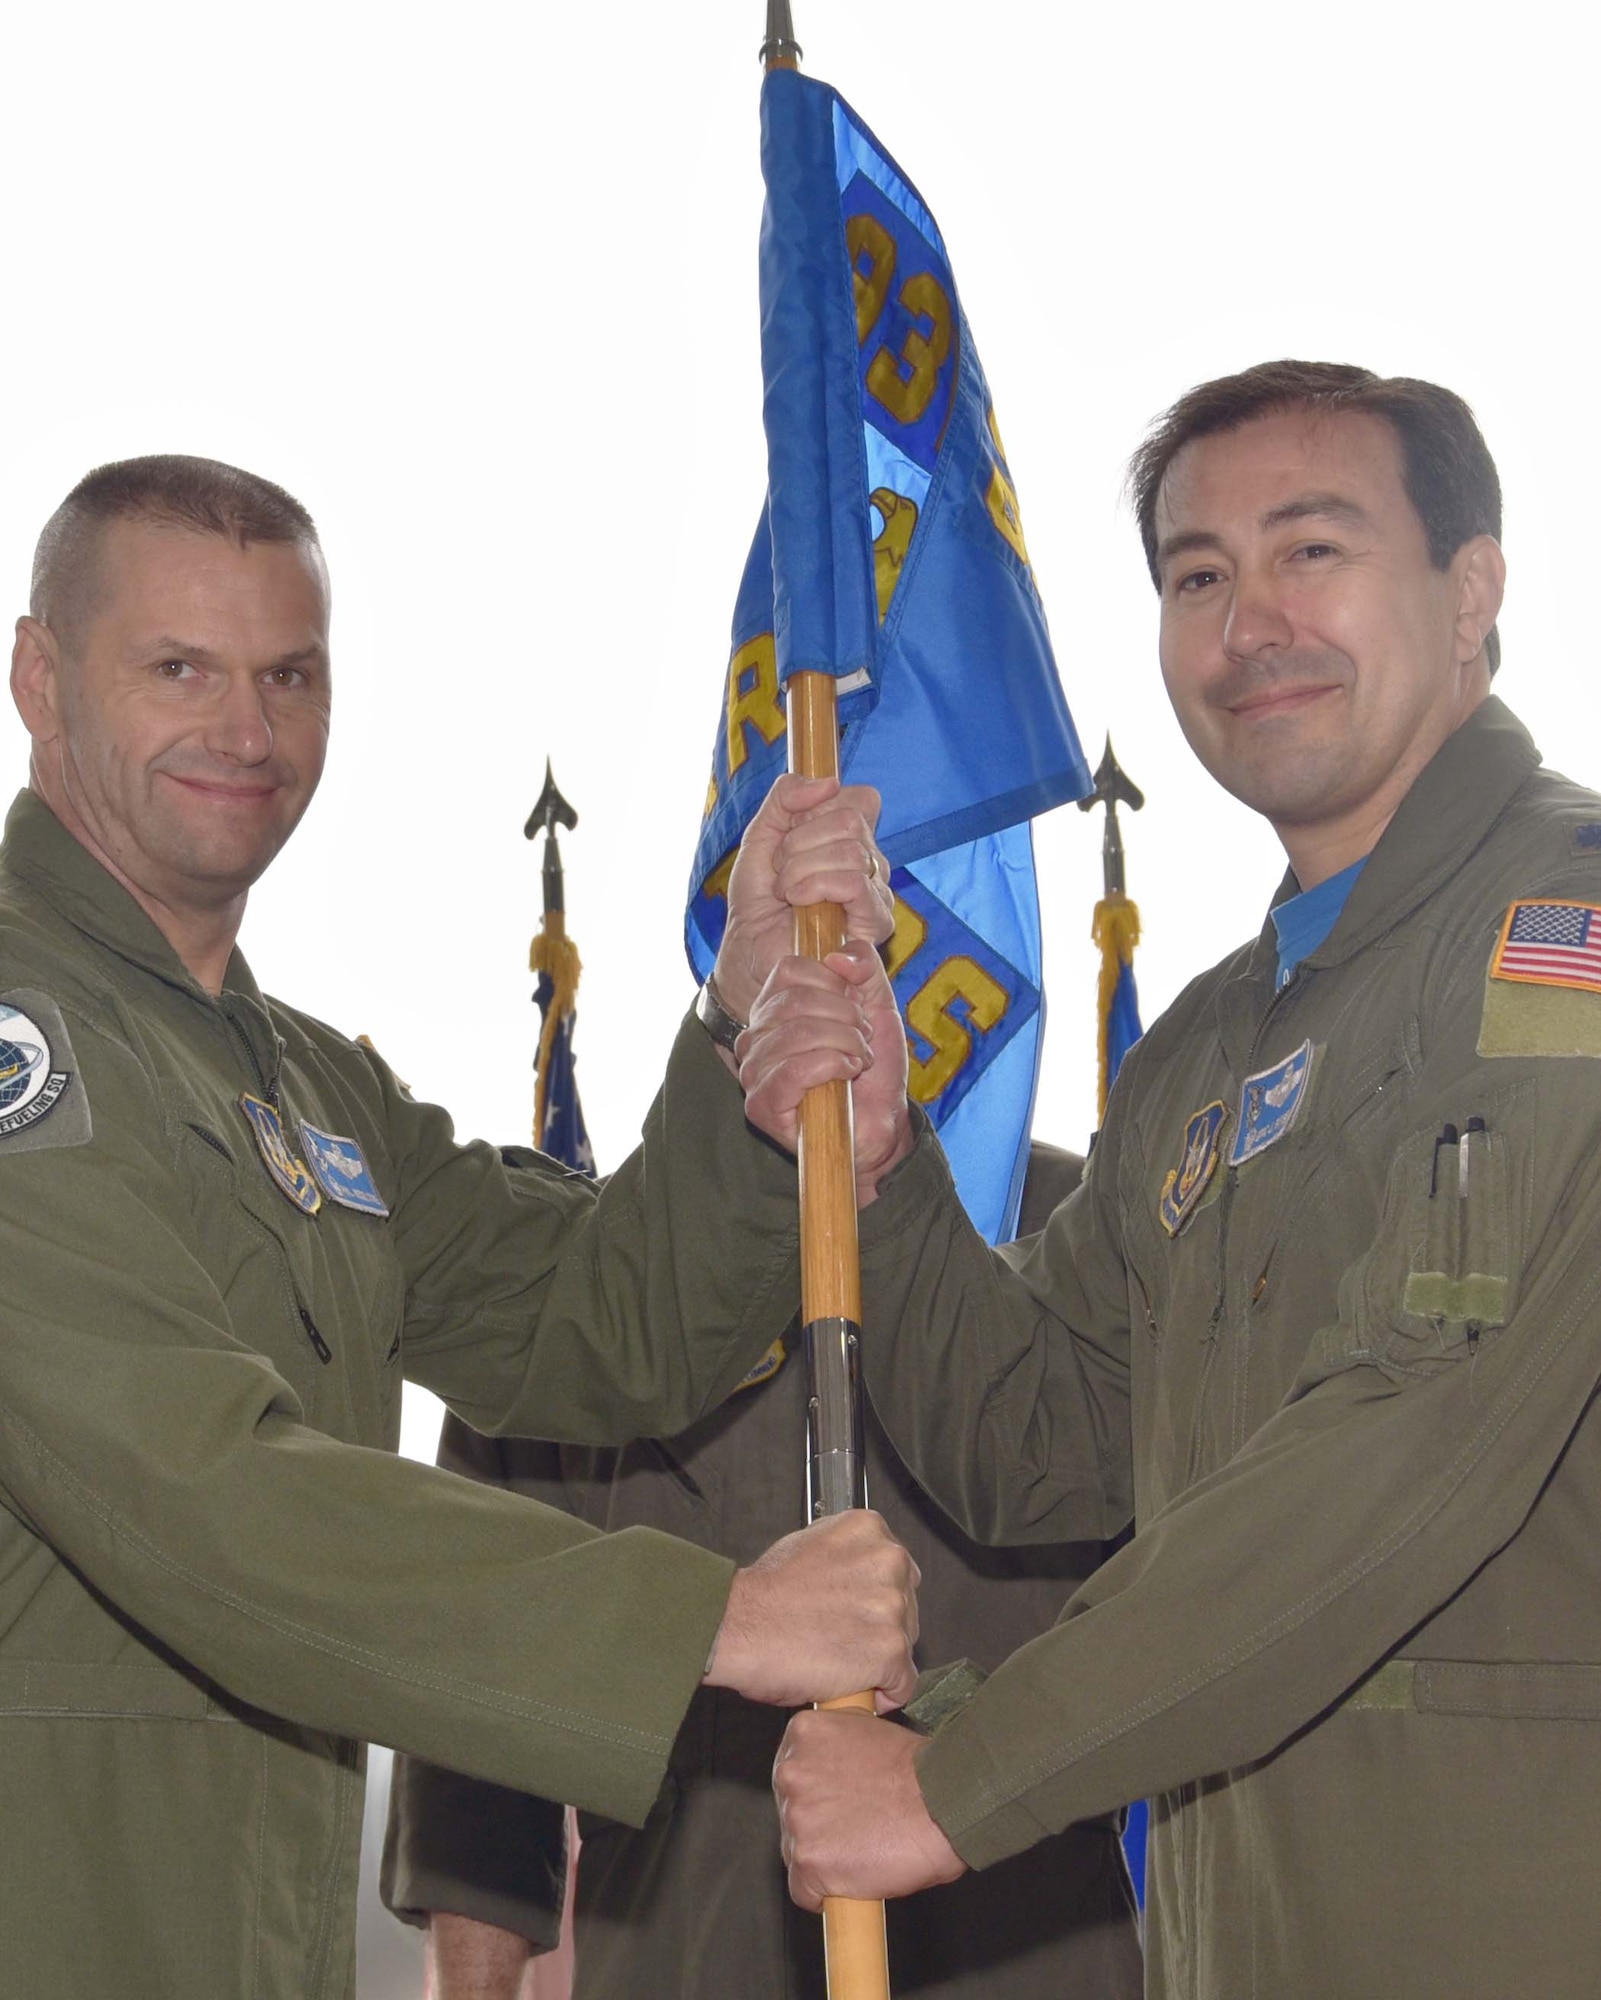 Col. Phil Heseltine, 931st Air Refueling Wing commander, hands the guidon to Lt. Col. Eric Rivero, the incoming 905th Air Refueling Squadron commander, during an official ceremony, May 4, 2019, McConnell Air Force Base, Kan.  Previously, the 905 ARS was the first Air Force flying unit to be assigned to Grand Forks Air Force Base, N.D, and it received its first KC-135 Stratotanker in 1960.  The unit stayed at Grand Forks until it was deactivated in 2010.